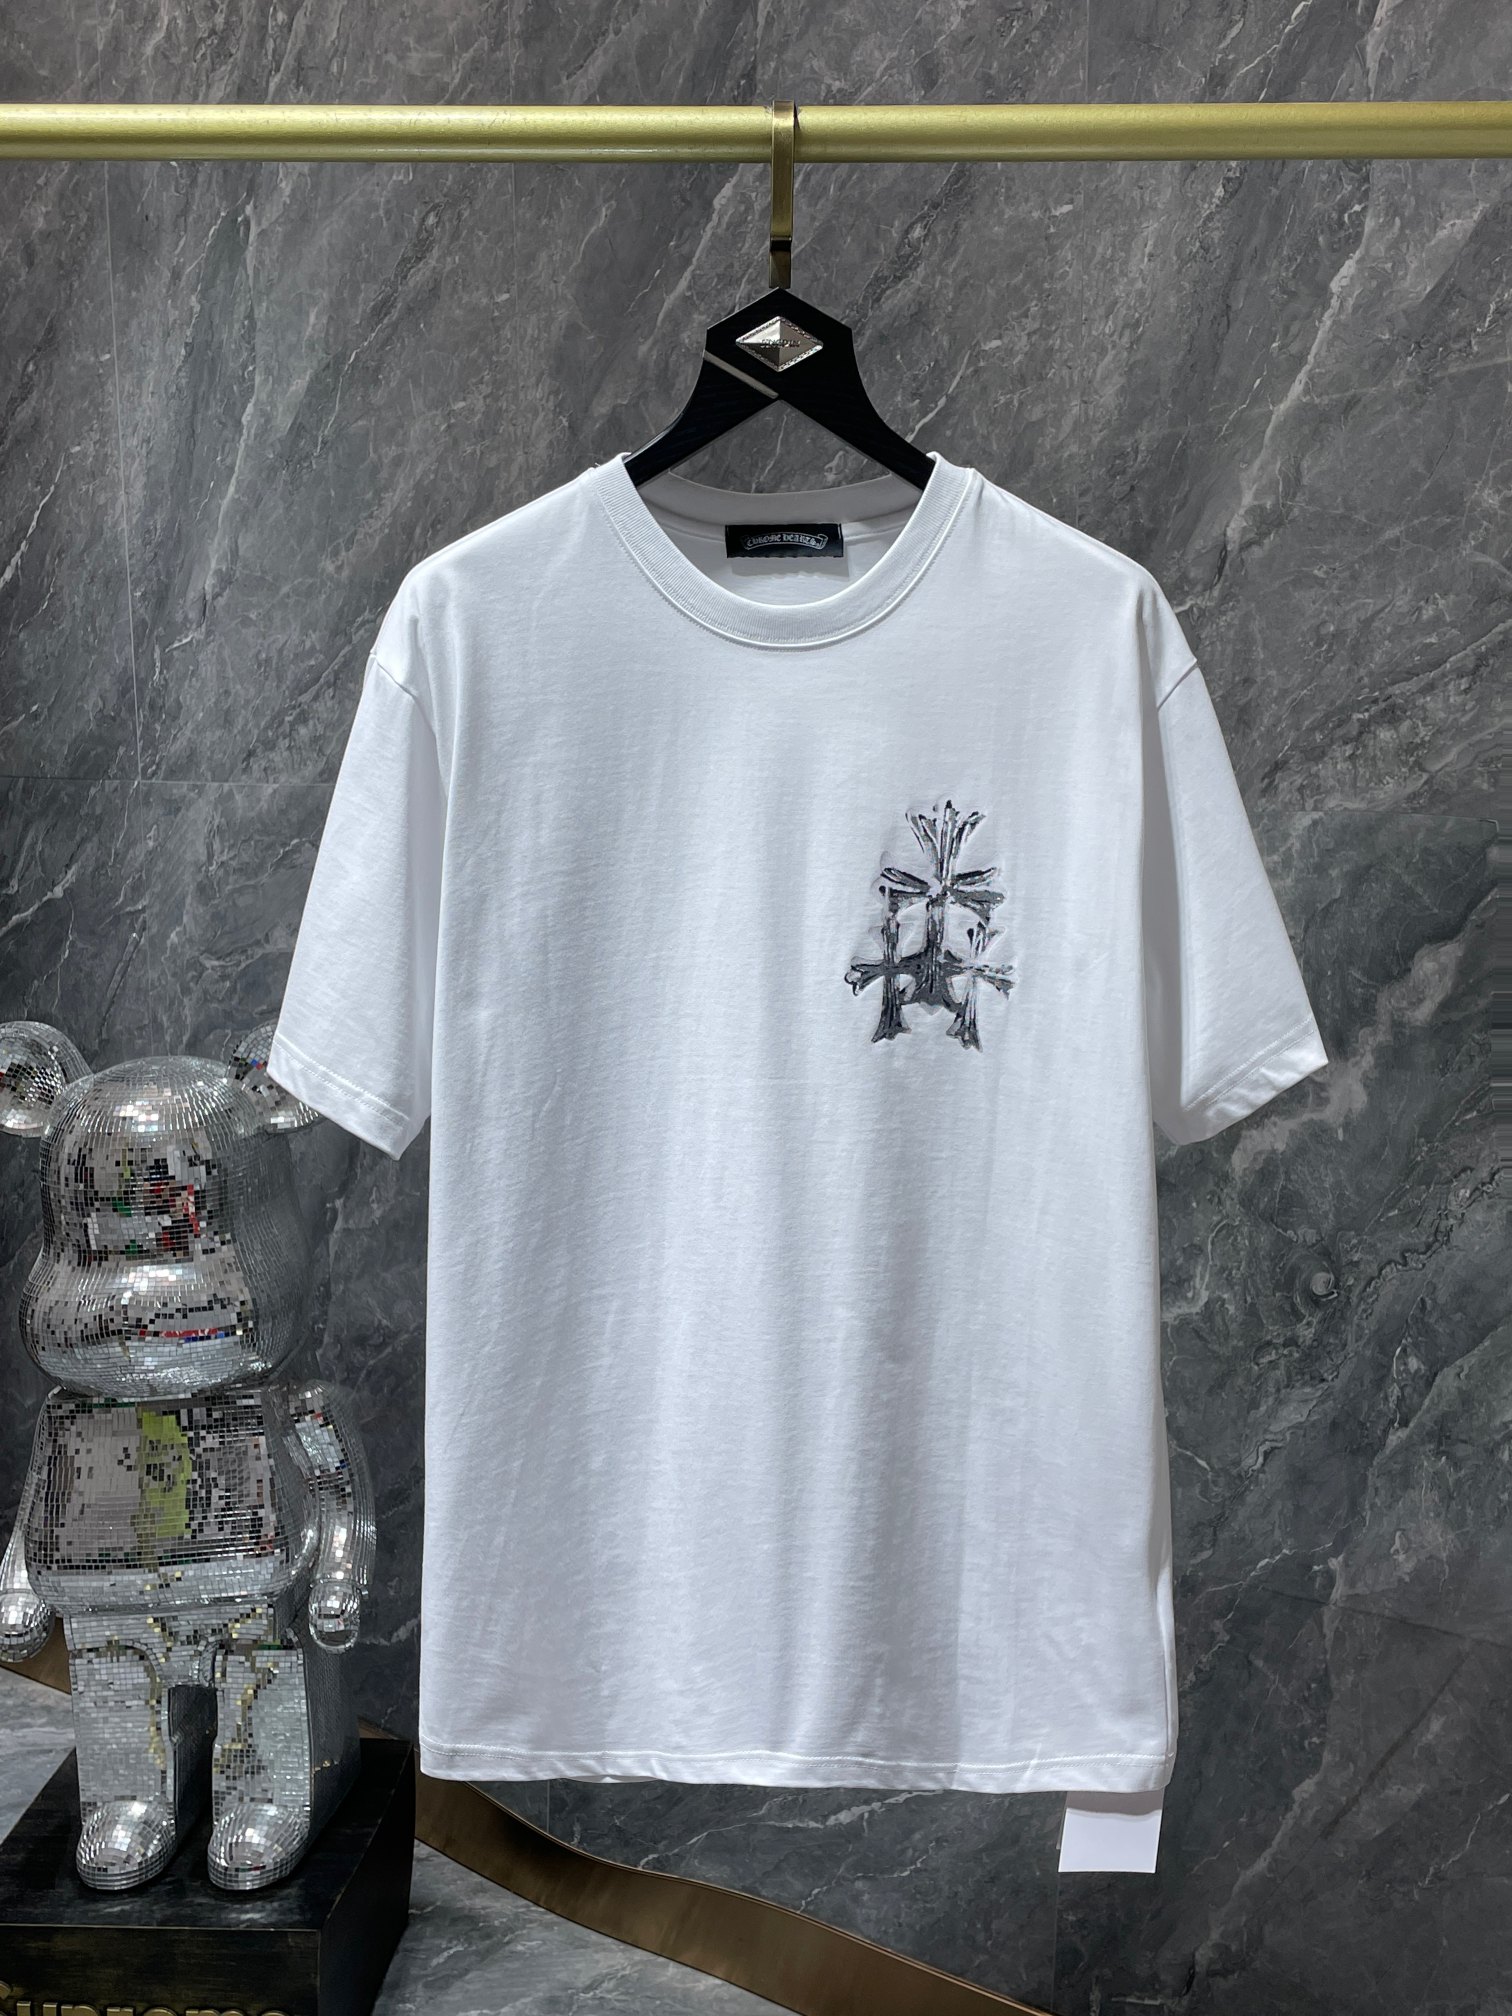 The Top Ultimate Knockoff
 Chrome Hearts Clothing T-Shirt Buy High quality Replica
 Short Sleeve